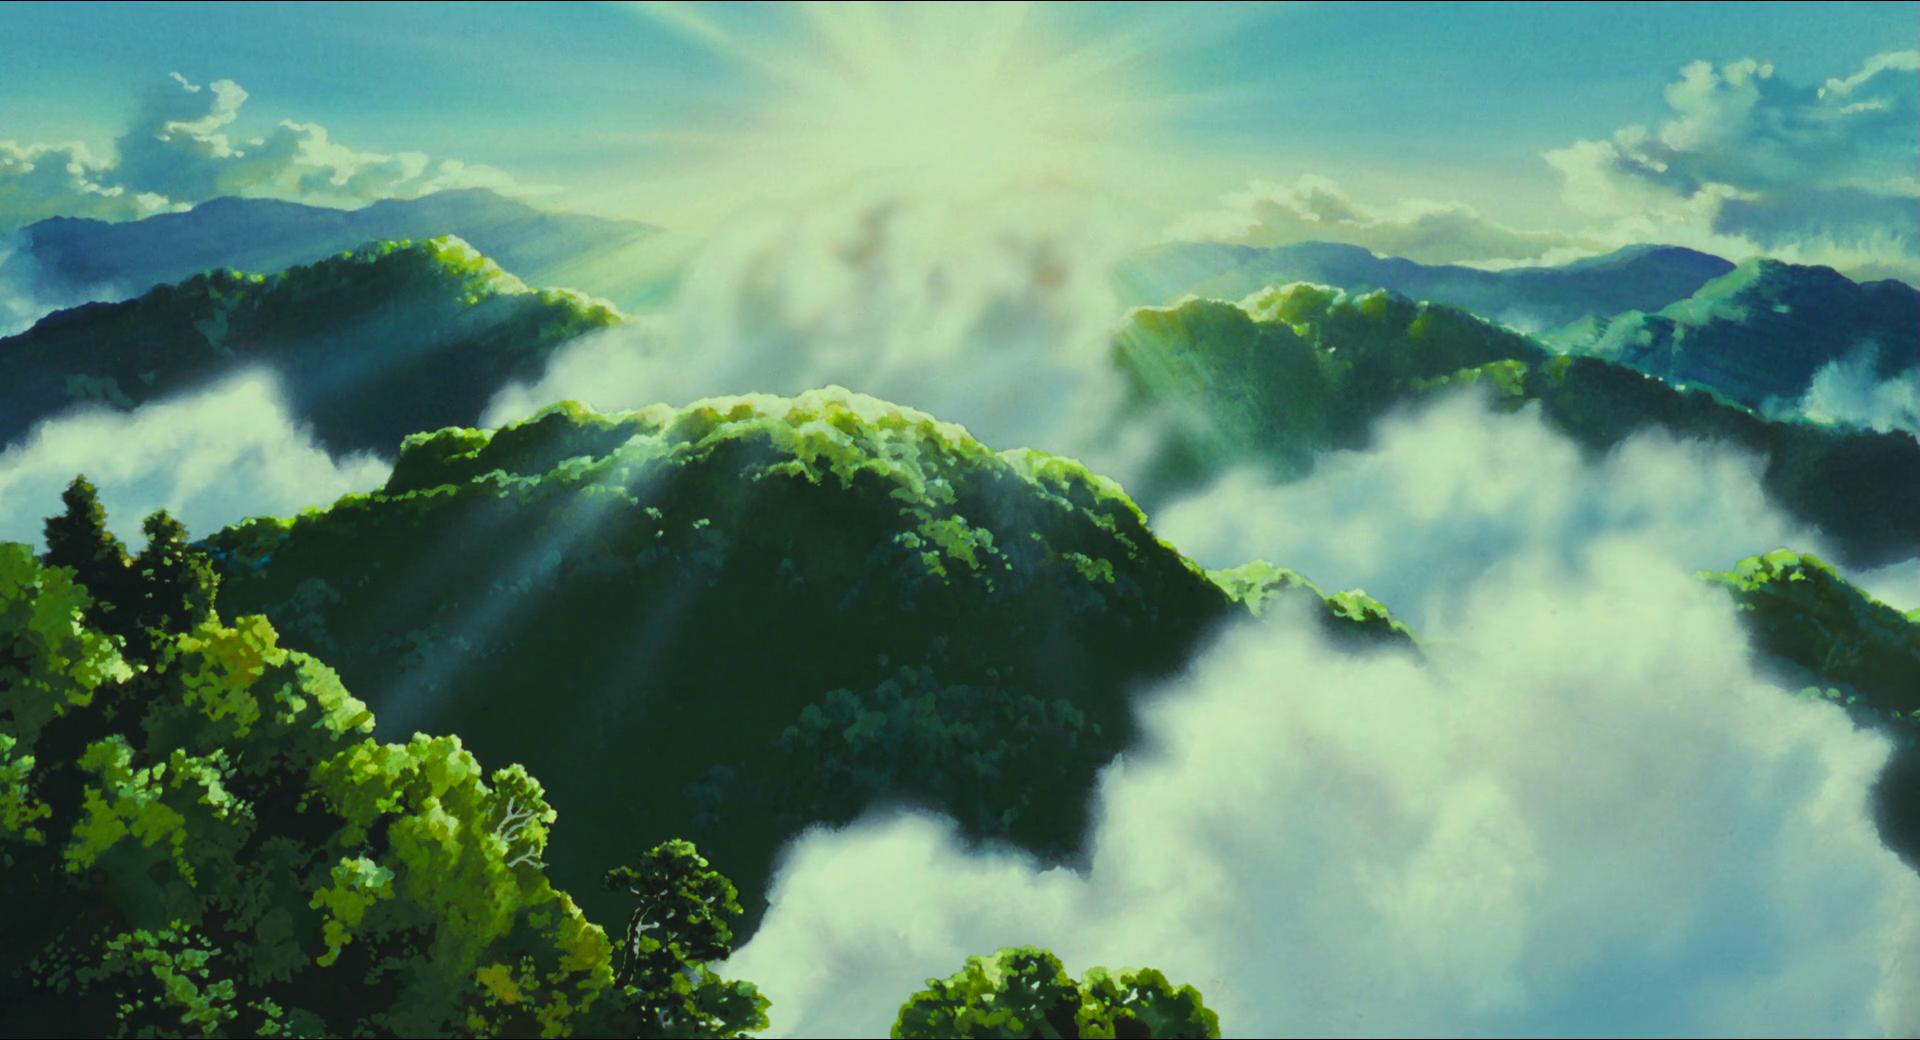 The Timeless Beauty Of Studio Ghibli’s Movies